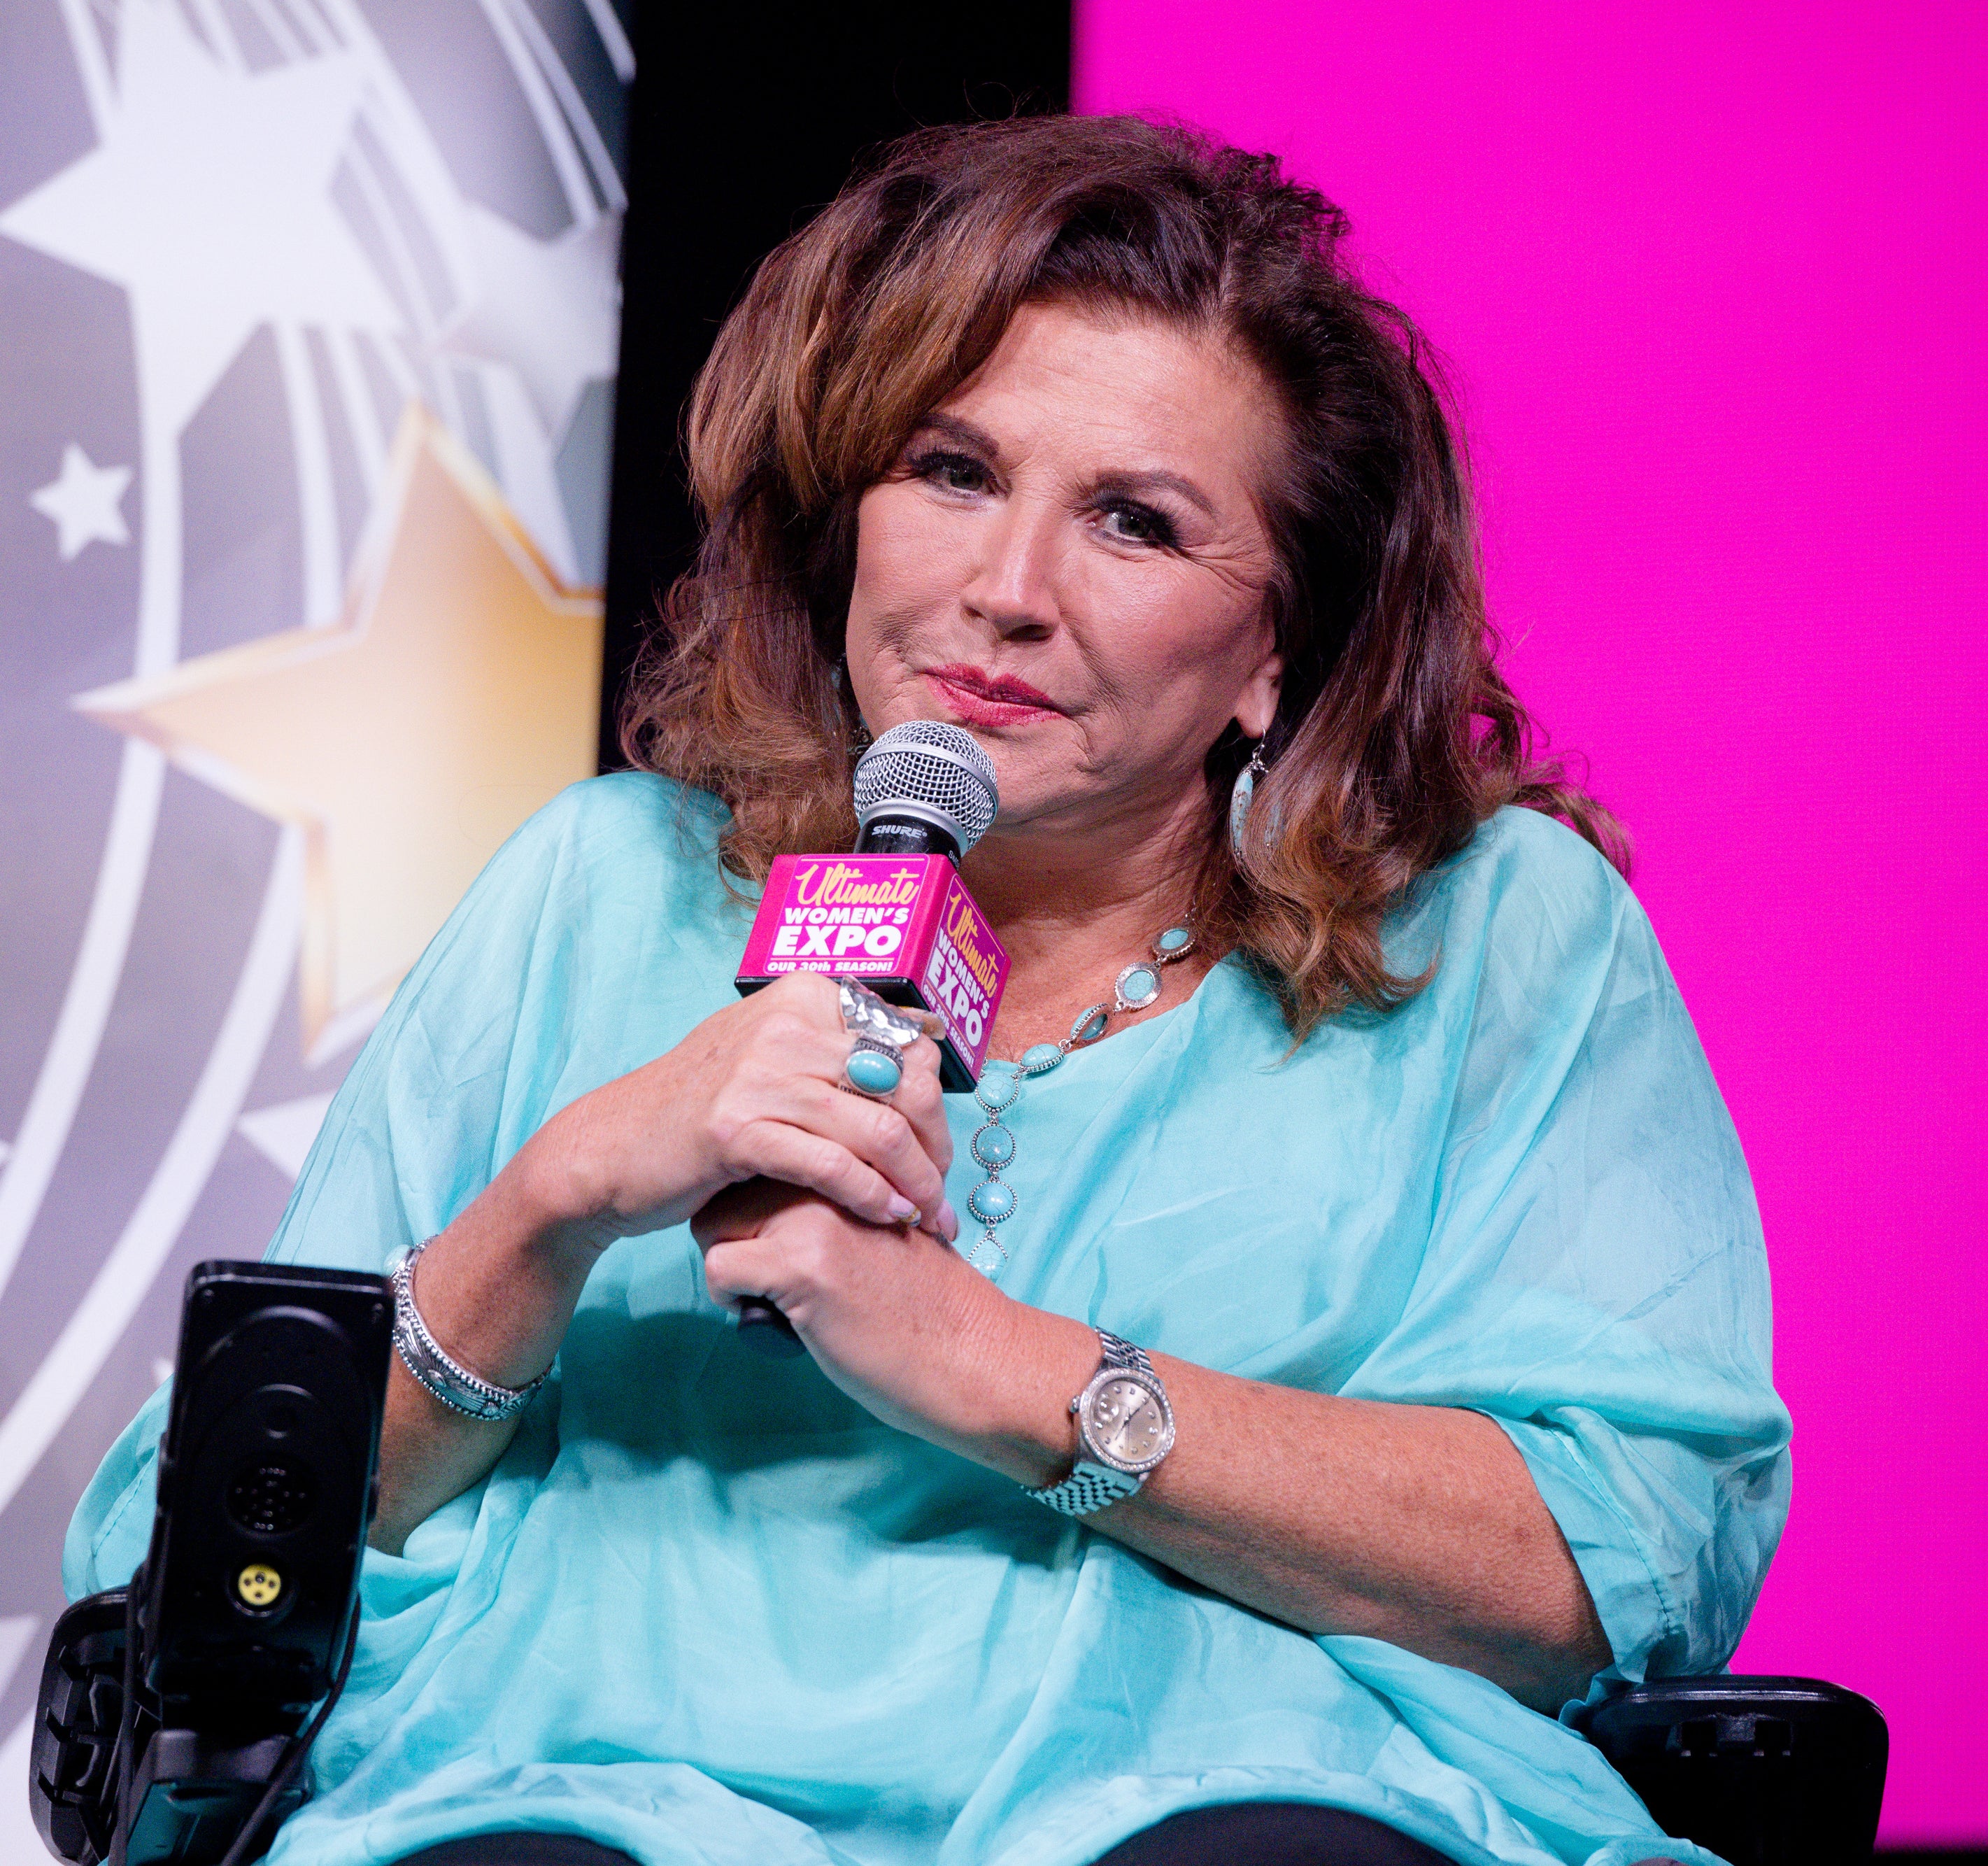 Abby seated and speaking into a microphone